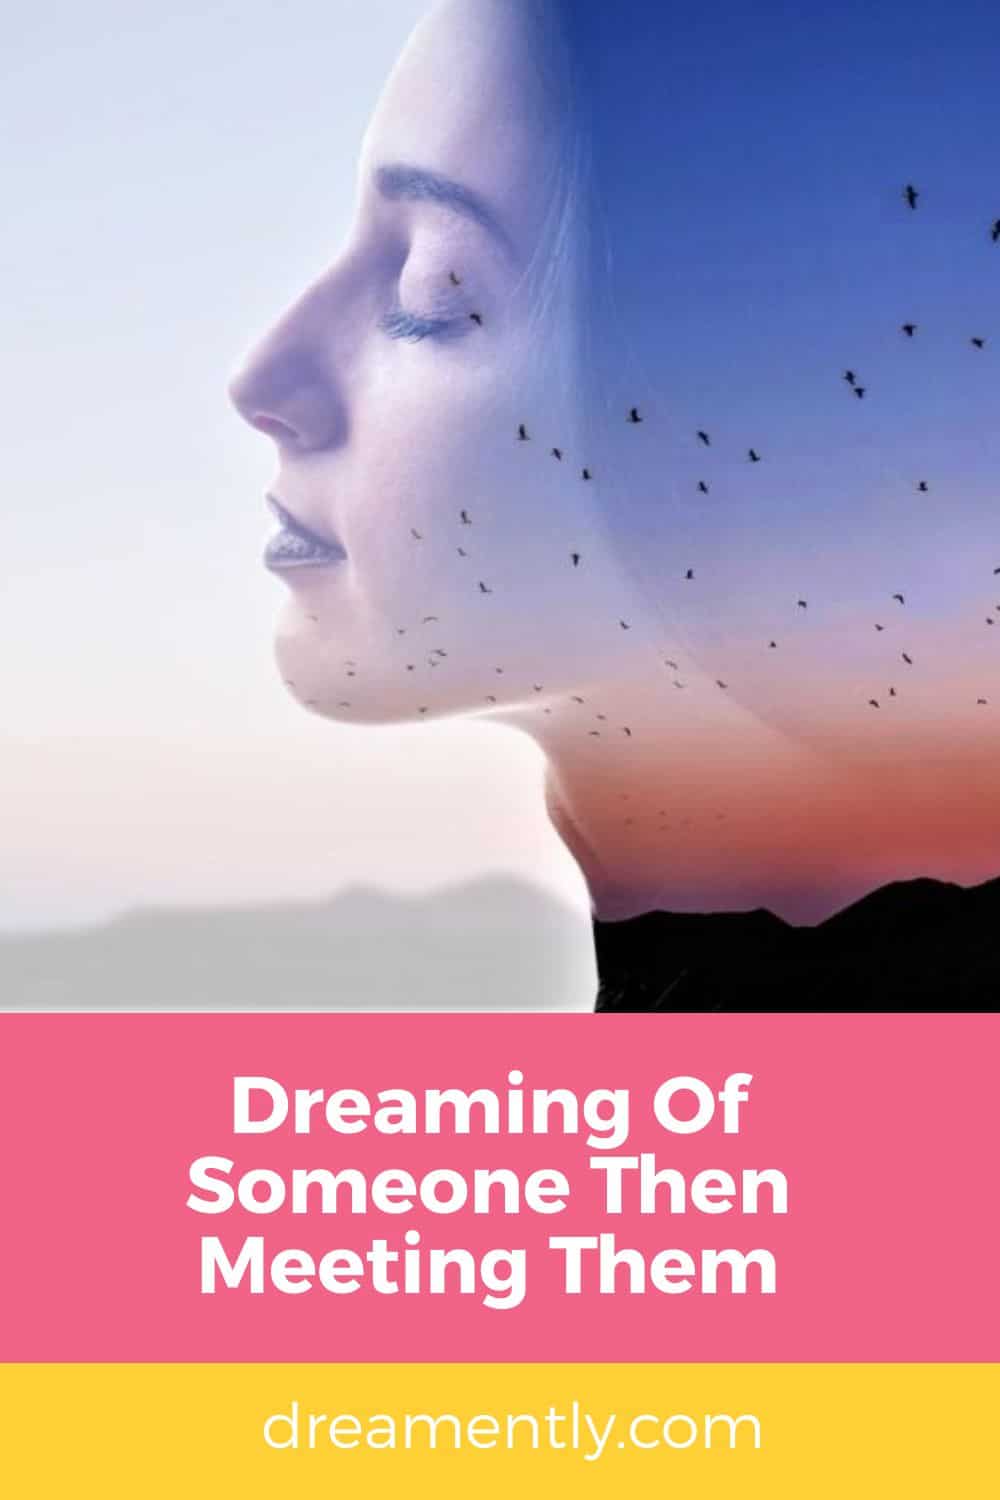 Dreaming Of Someone Then Meeting Them